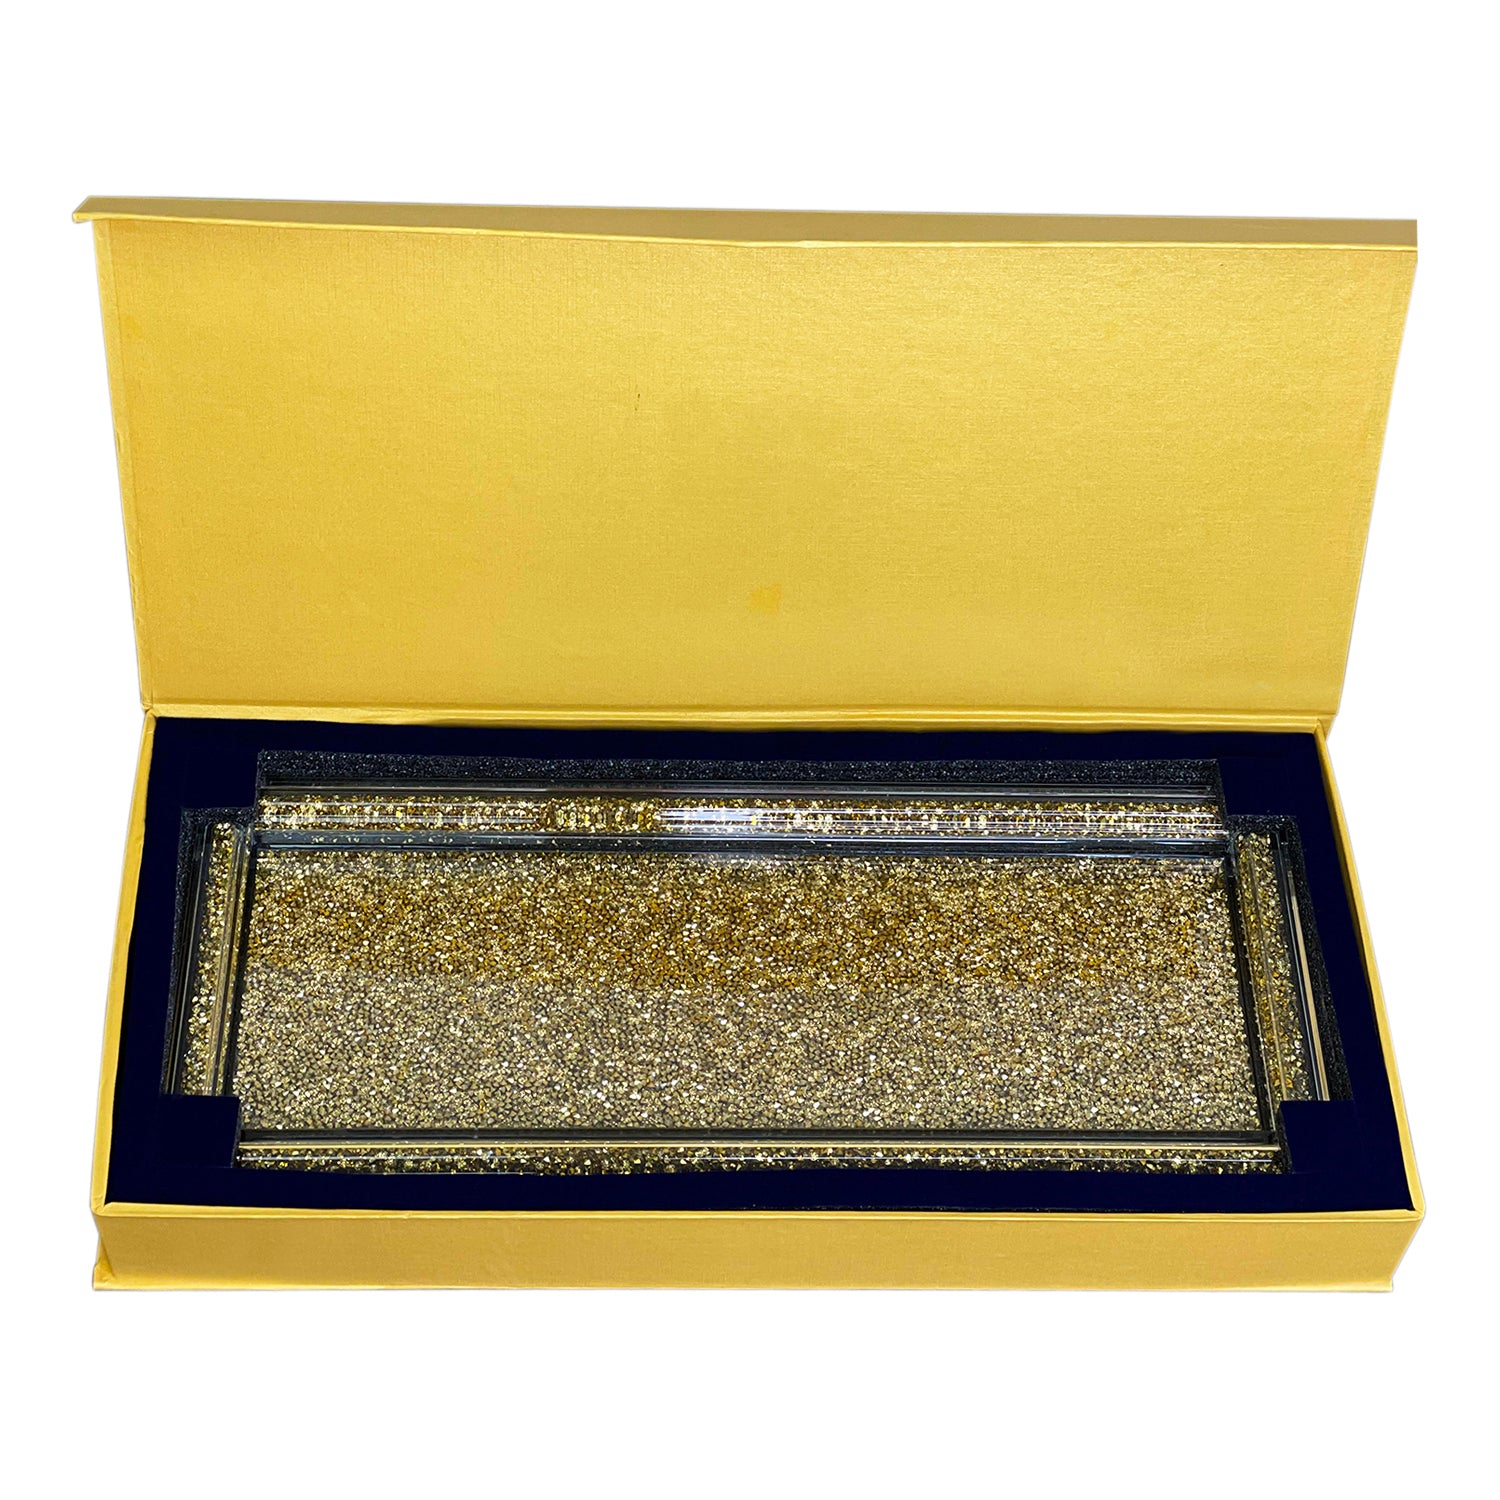 Ambrose Exquisite Large Glass Tray in Gift Box gold-glass